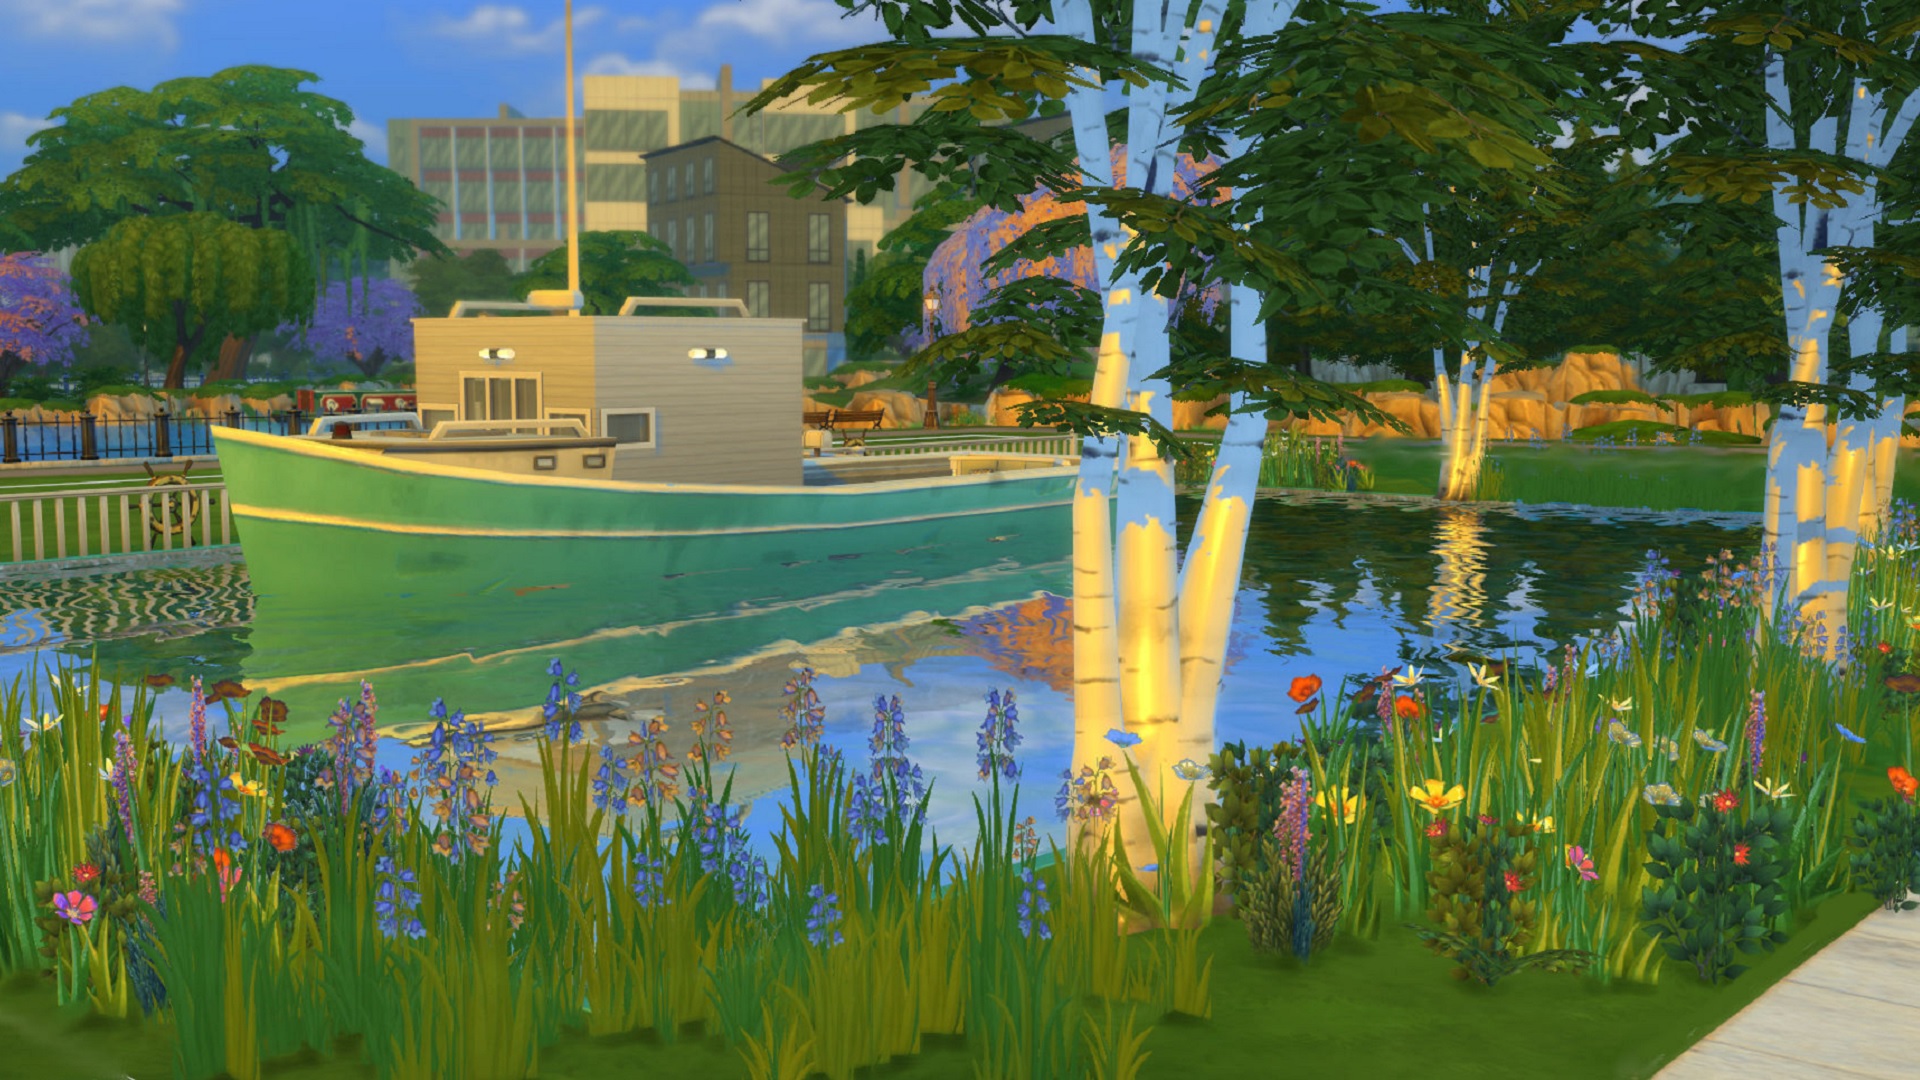 Sims 4 Boat House Mod: Water Boat House